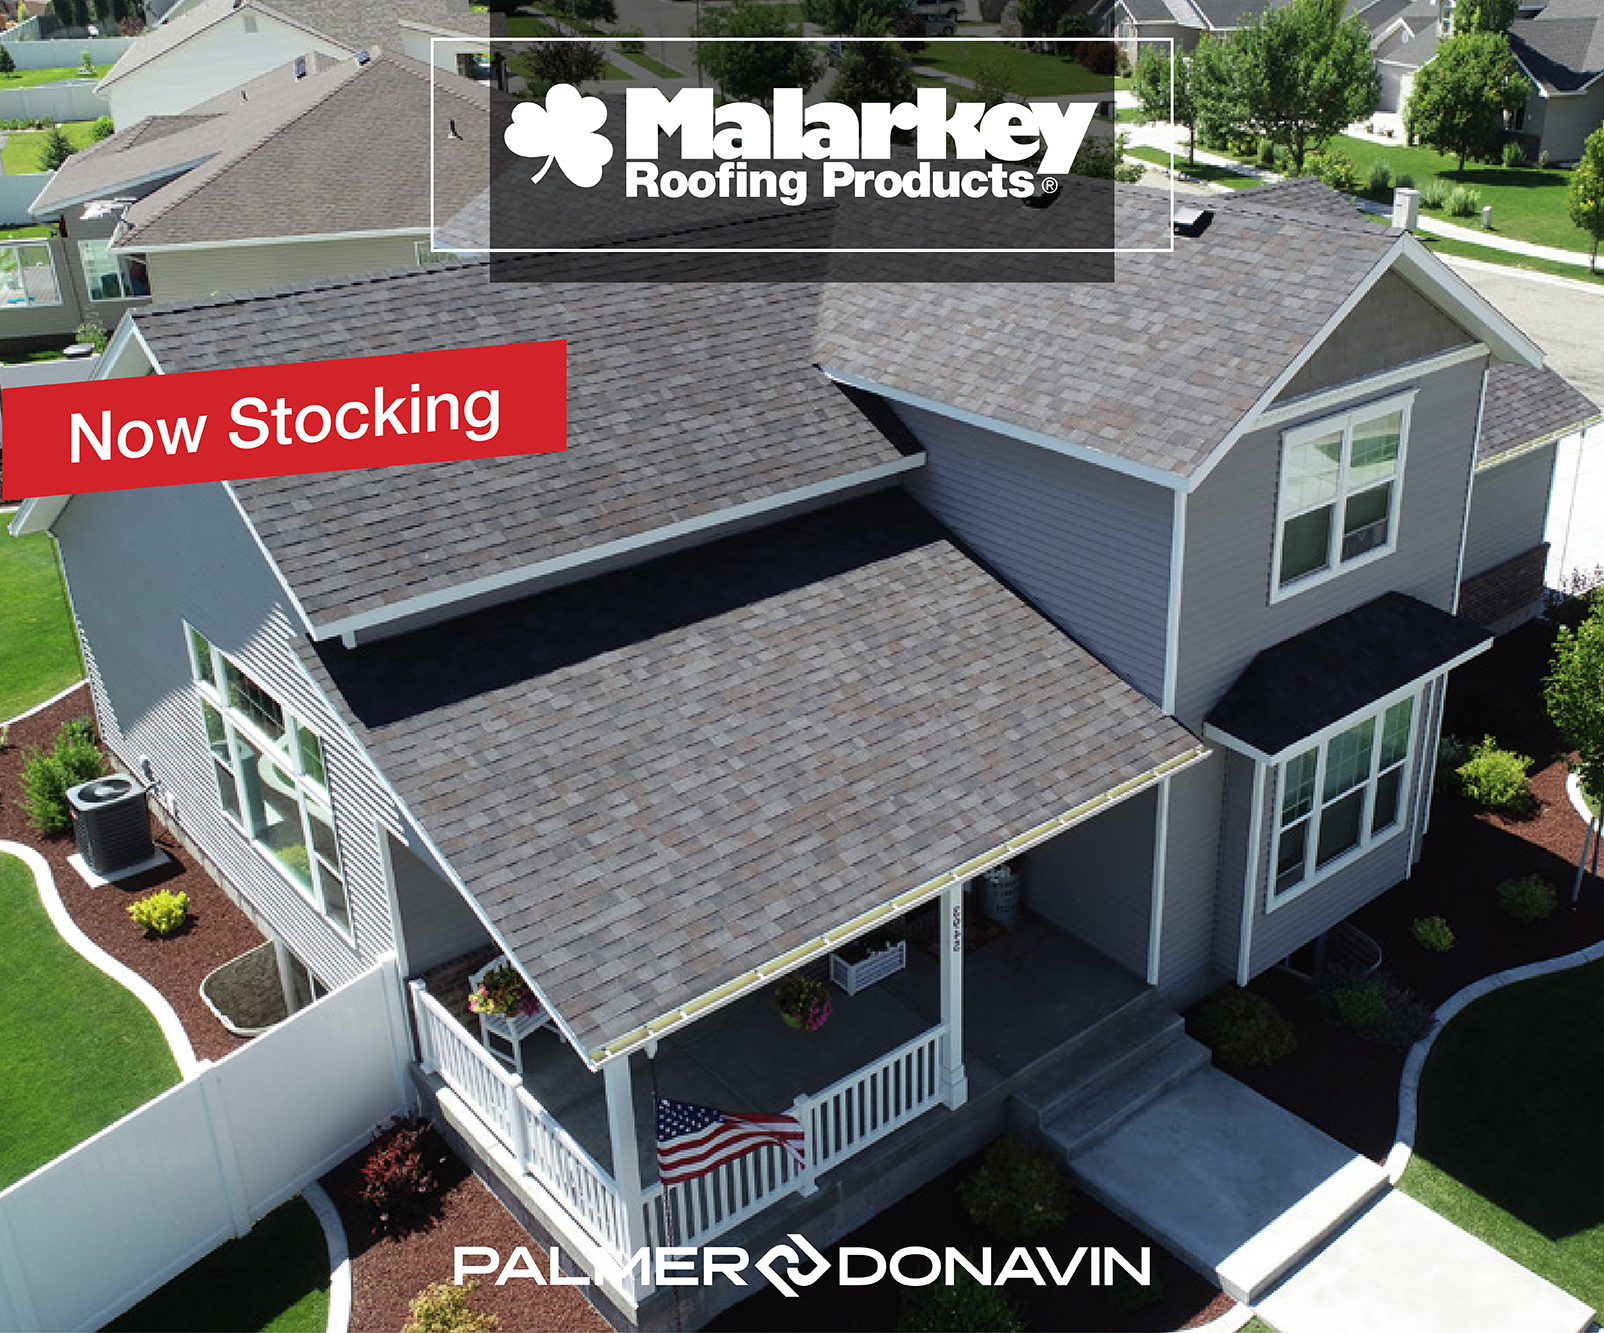 Palmer-Donavin Brings Malarkey Roofing Products to Midwest